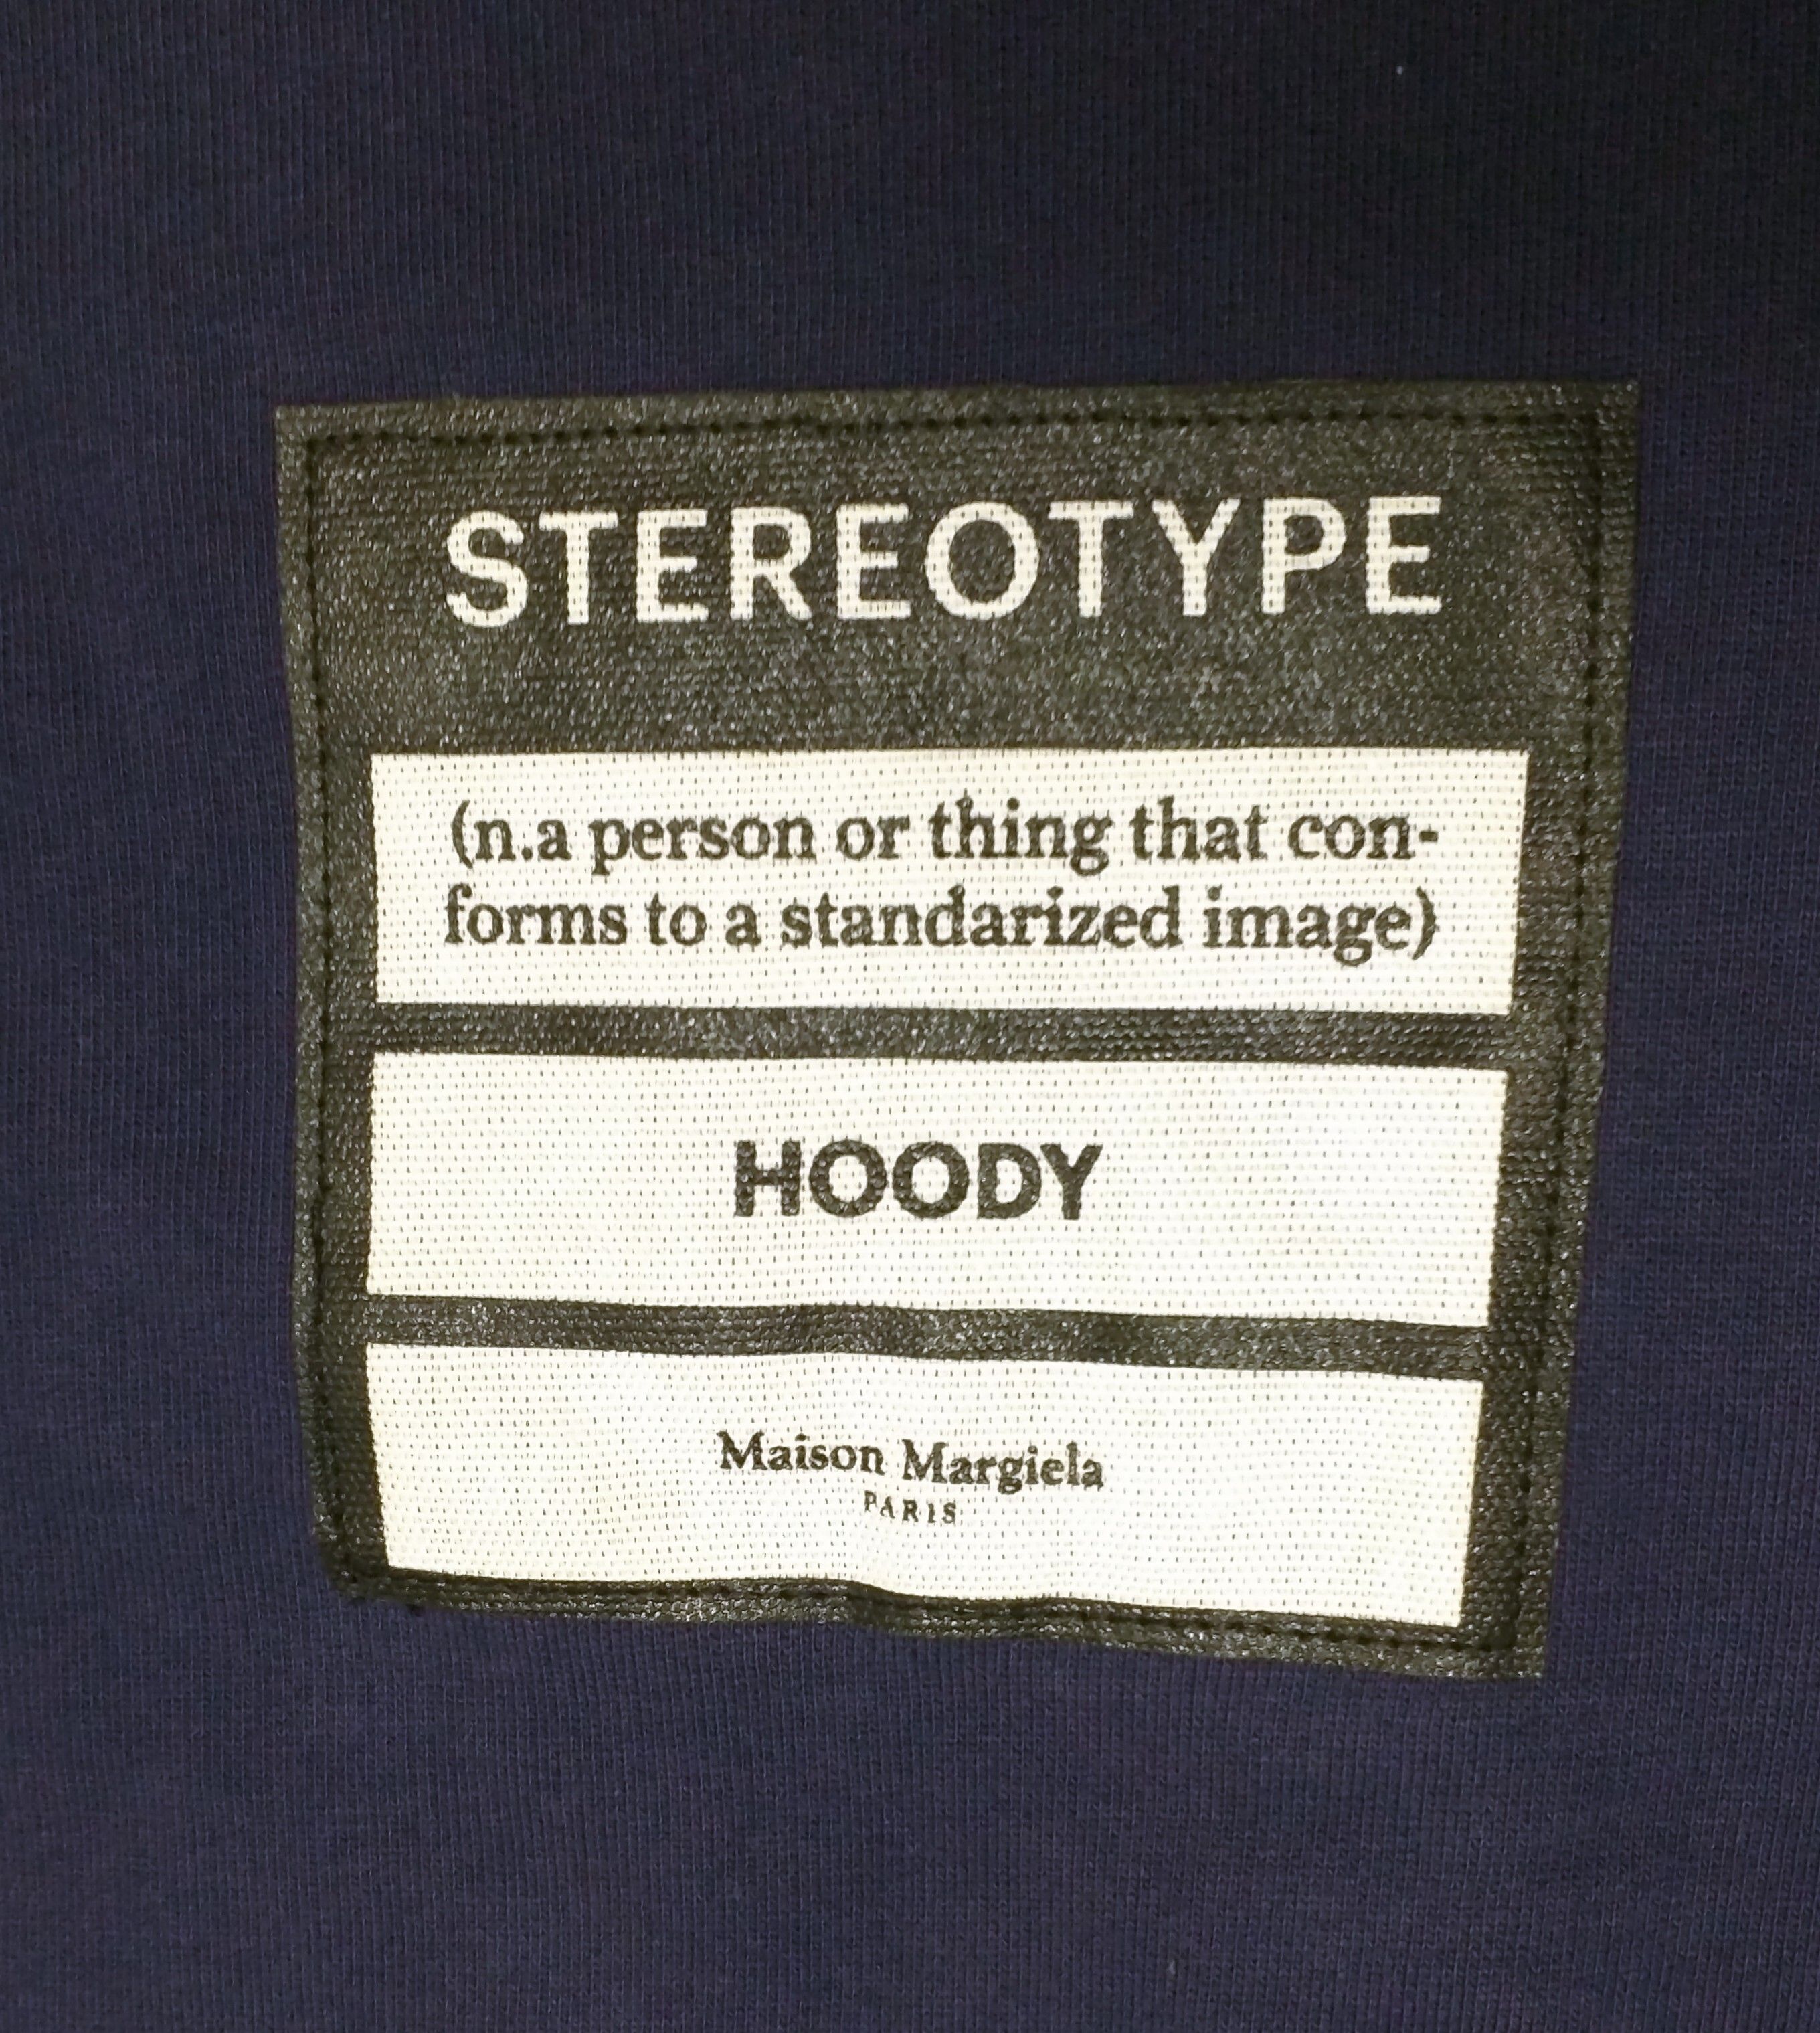 Maison Margiela Stereotype Hoodie Navy Blue 48 MMM Pullover Size US L / EU 52-54 / 3 - 6 Thumbnail